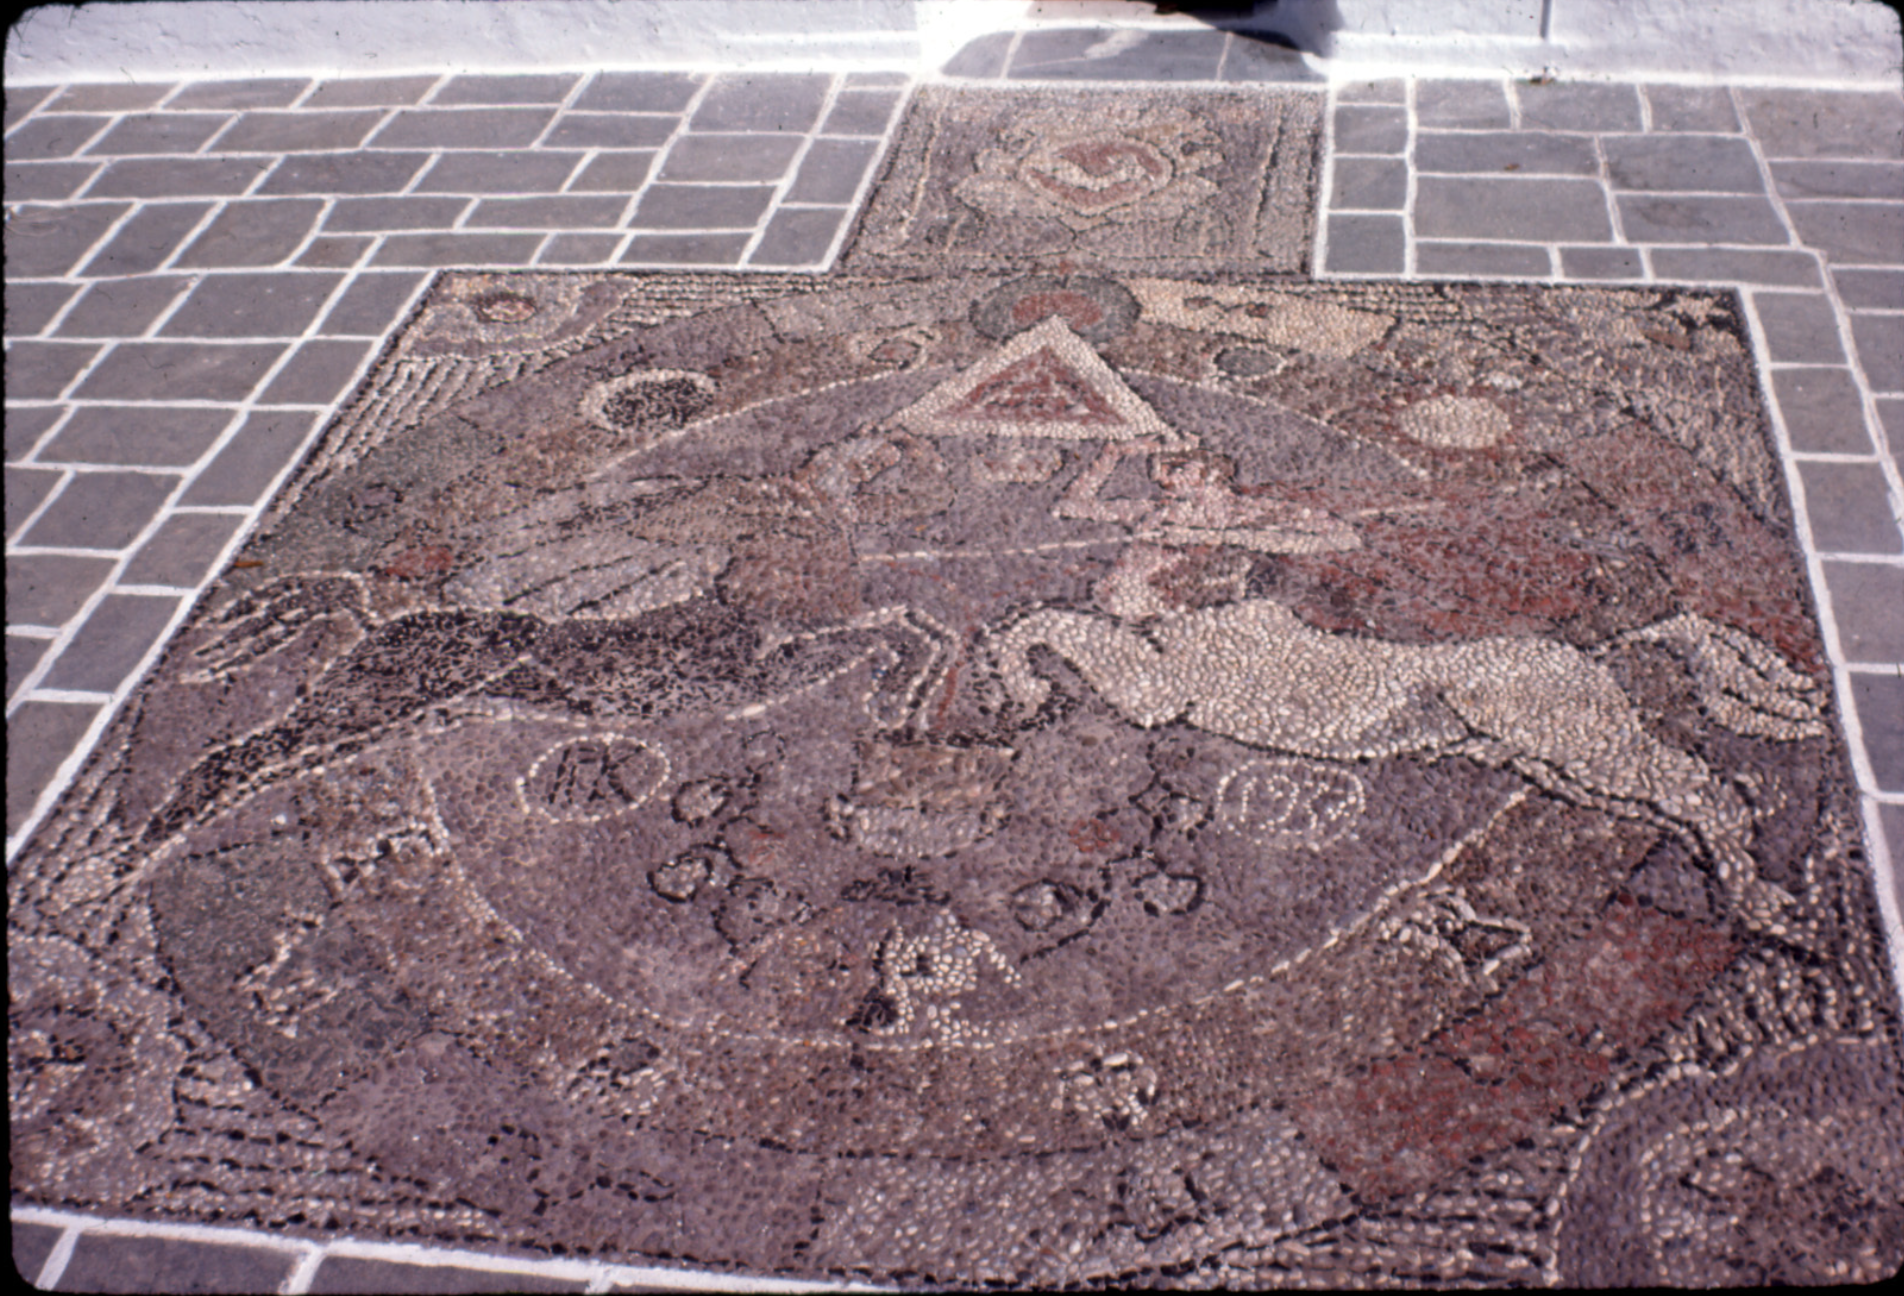 This mosaic is called the mosaic of the centaurs located in the Melos-Adamas Church. The mosaic shows two centaurs facing each other surrounded by geometric shapes, including a triangle above them, a moon to the left, and a sun to the right. Both centaurs are in what is known as the “heraldic position”, which means they are displayed in the position of a crest or symbol. A mosaic is one of the few forms of art a woman can view and enjoy because it can be displayed around the home in the areas that a woman is allowed to go. Which is, technically speaking, anywhere except where the symposia, or meetings, are held.  